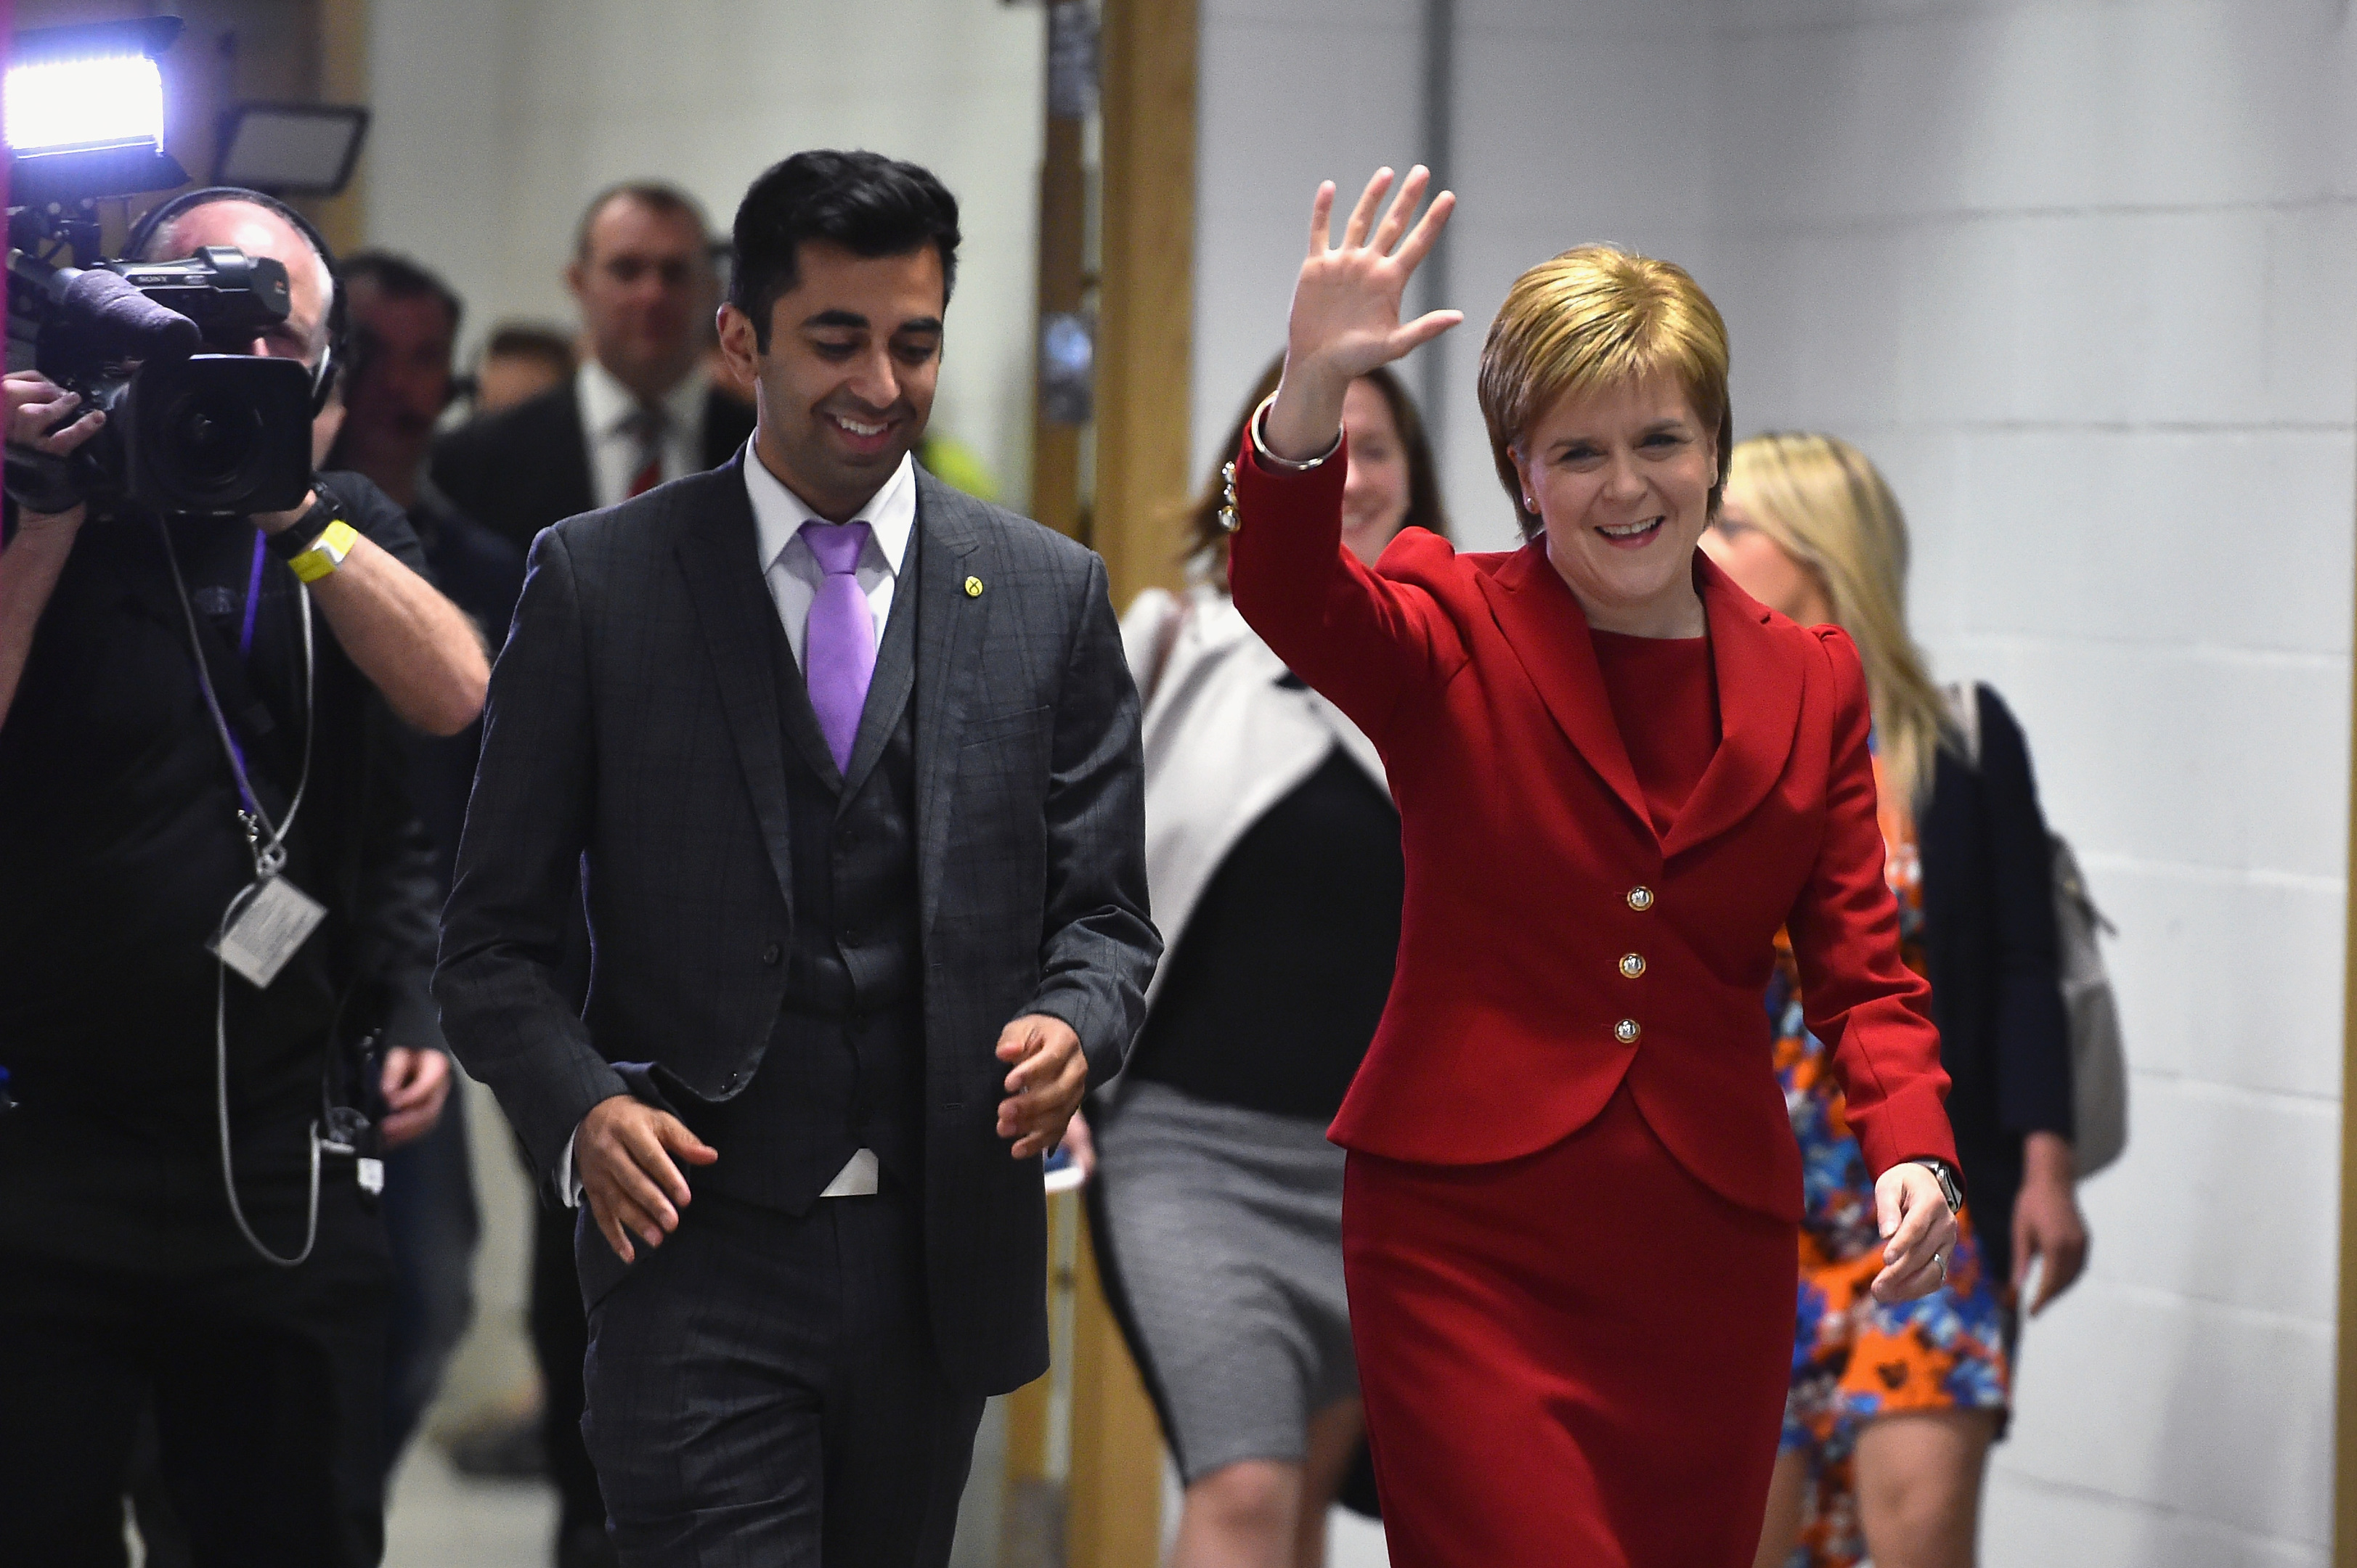 SNP leader Nicola Sturgeon arrives with Humza Yousaf at the count for the Scottish Parliament elections at the Emirates Arena (Jeff J Mitchell/Getty Images)